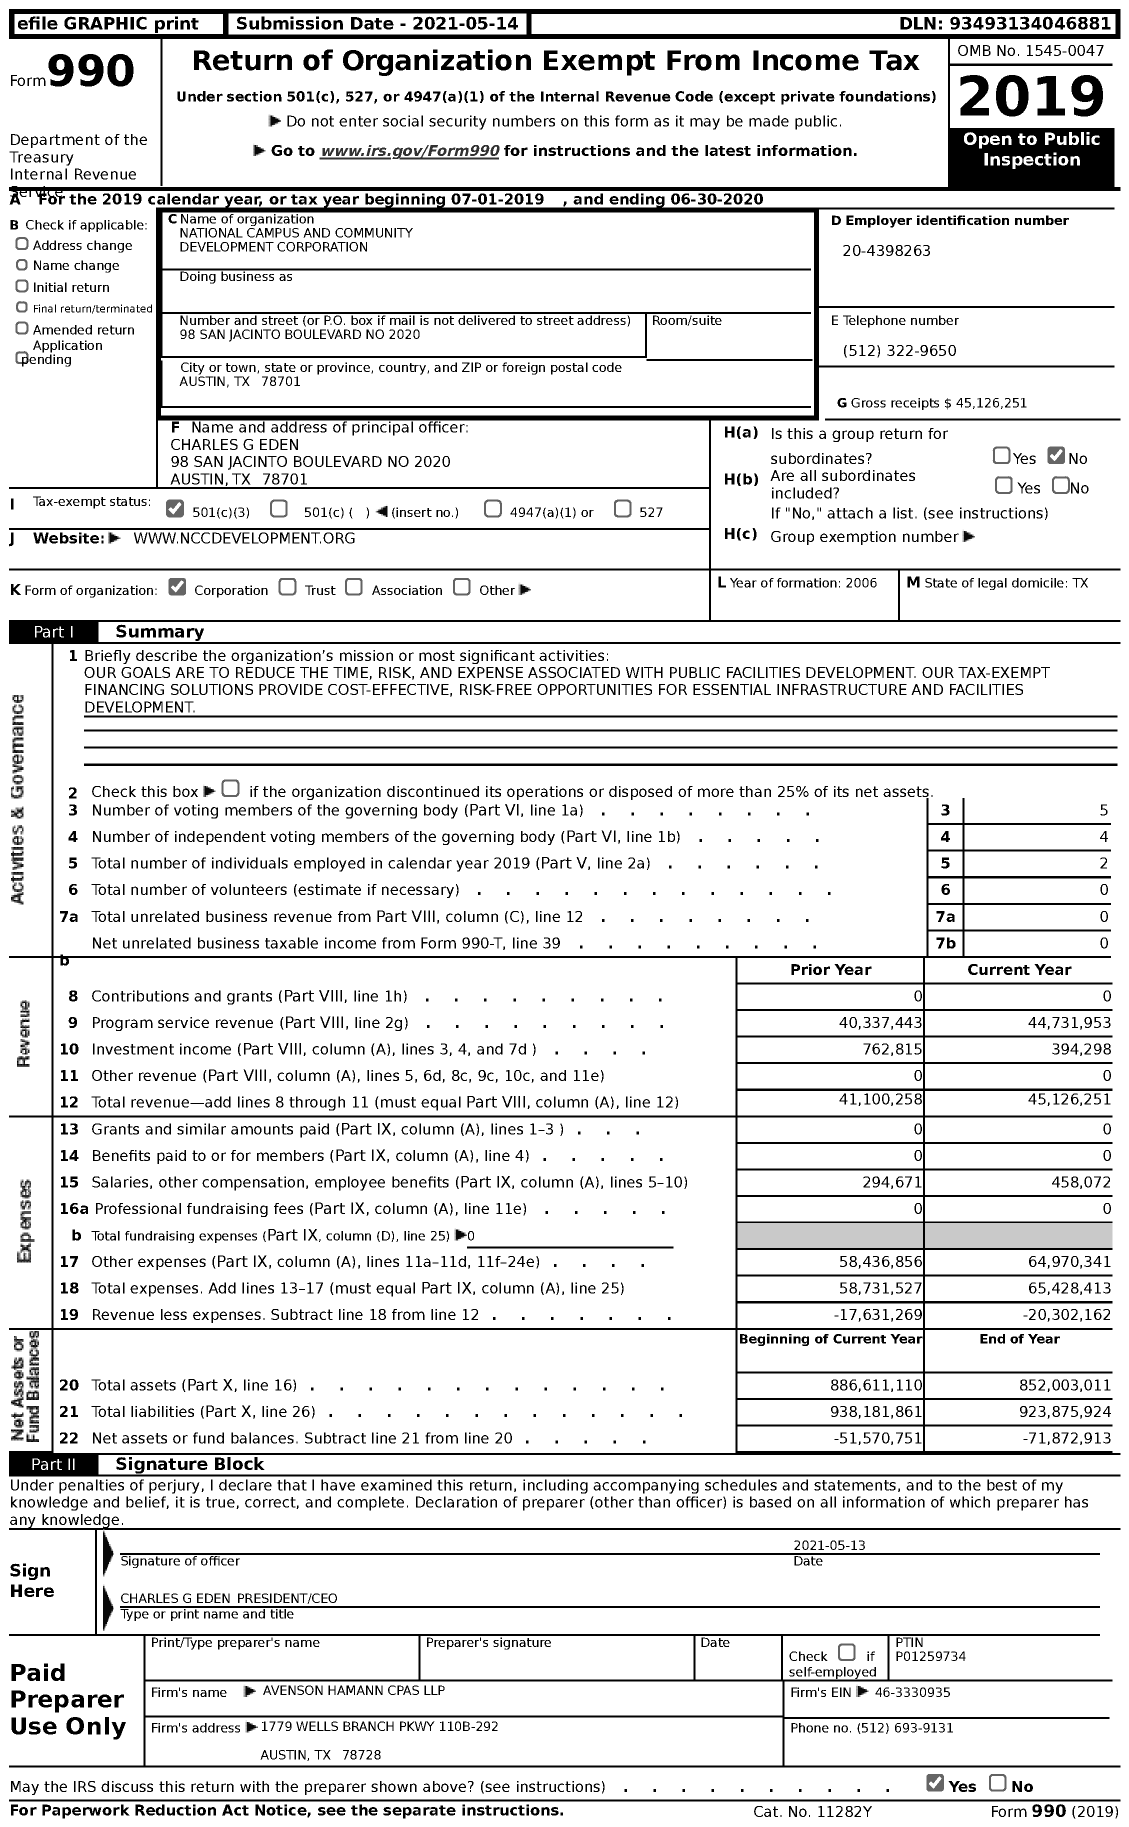 Image of first page of 2019 Form 990 for National Campus and Community Development Corporation (NCCDC)